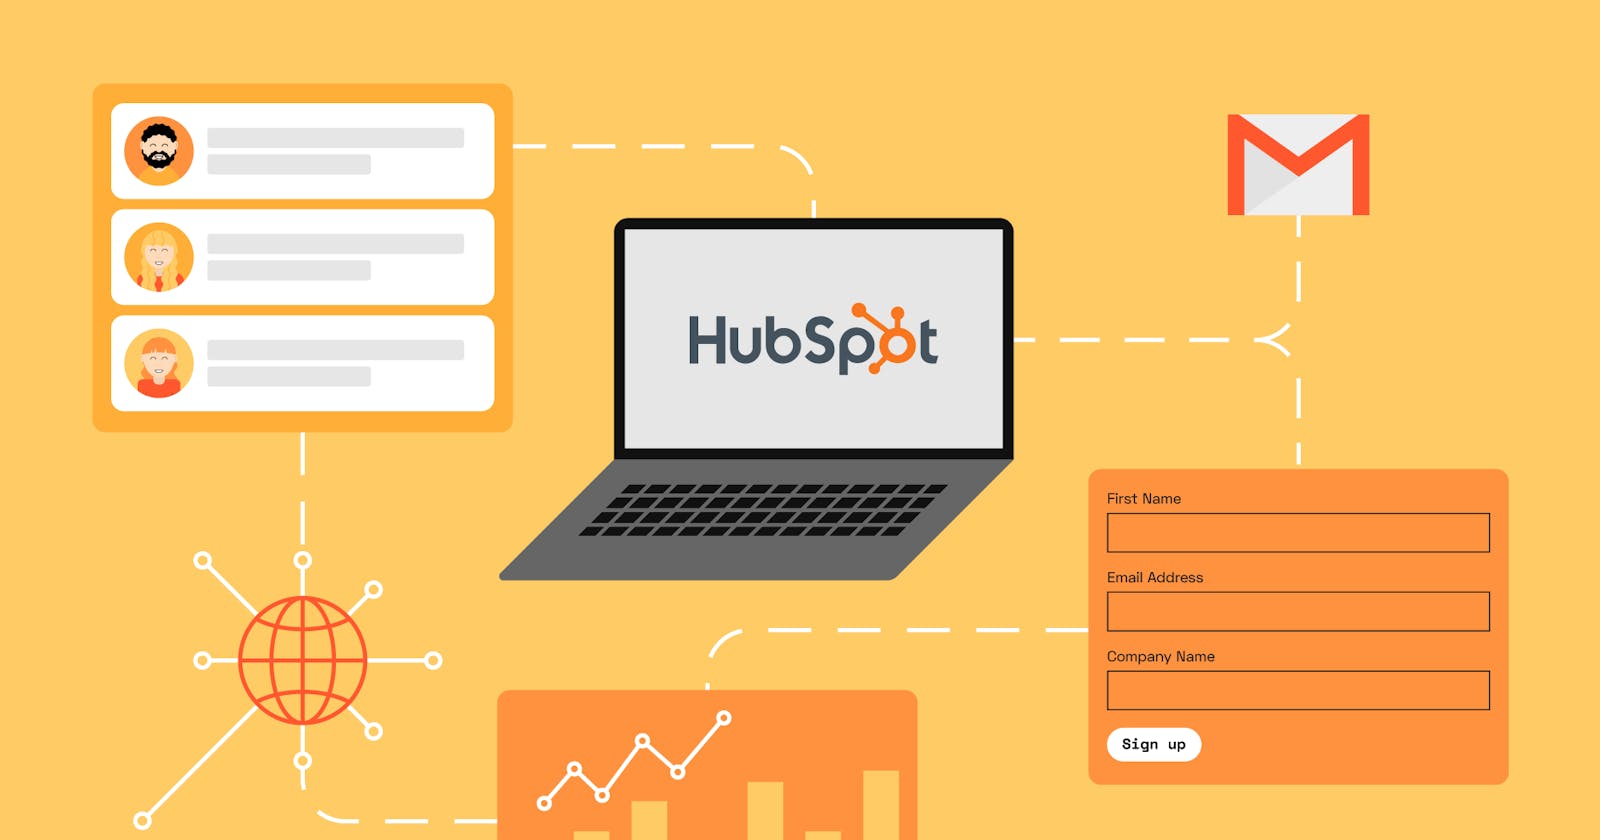 Hubspot : Create Contact Automatically